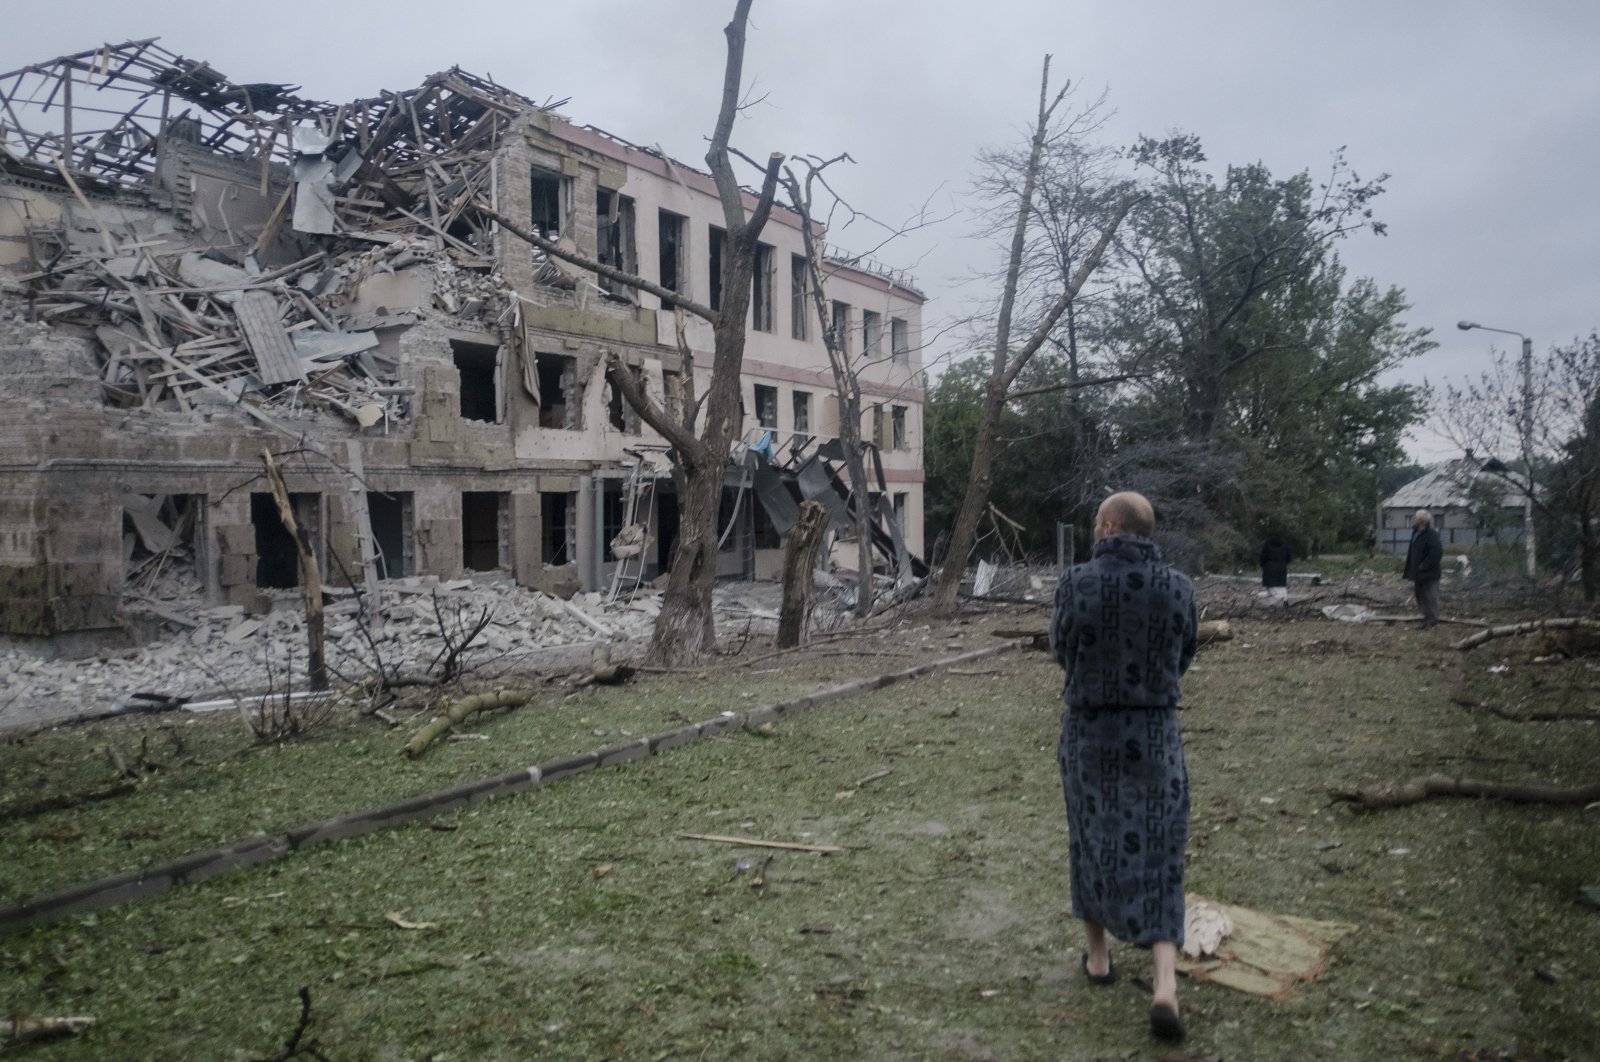 Locals stand in front of a damaged school after a missile strike hit the city of Kramatorsk, Donetsk region, eastern Ukraine, July 21, 2022. (EPA Photo)